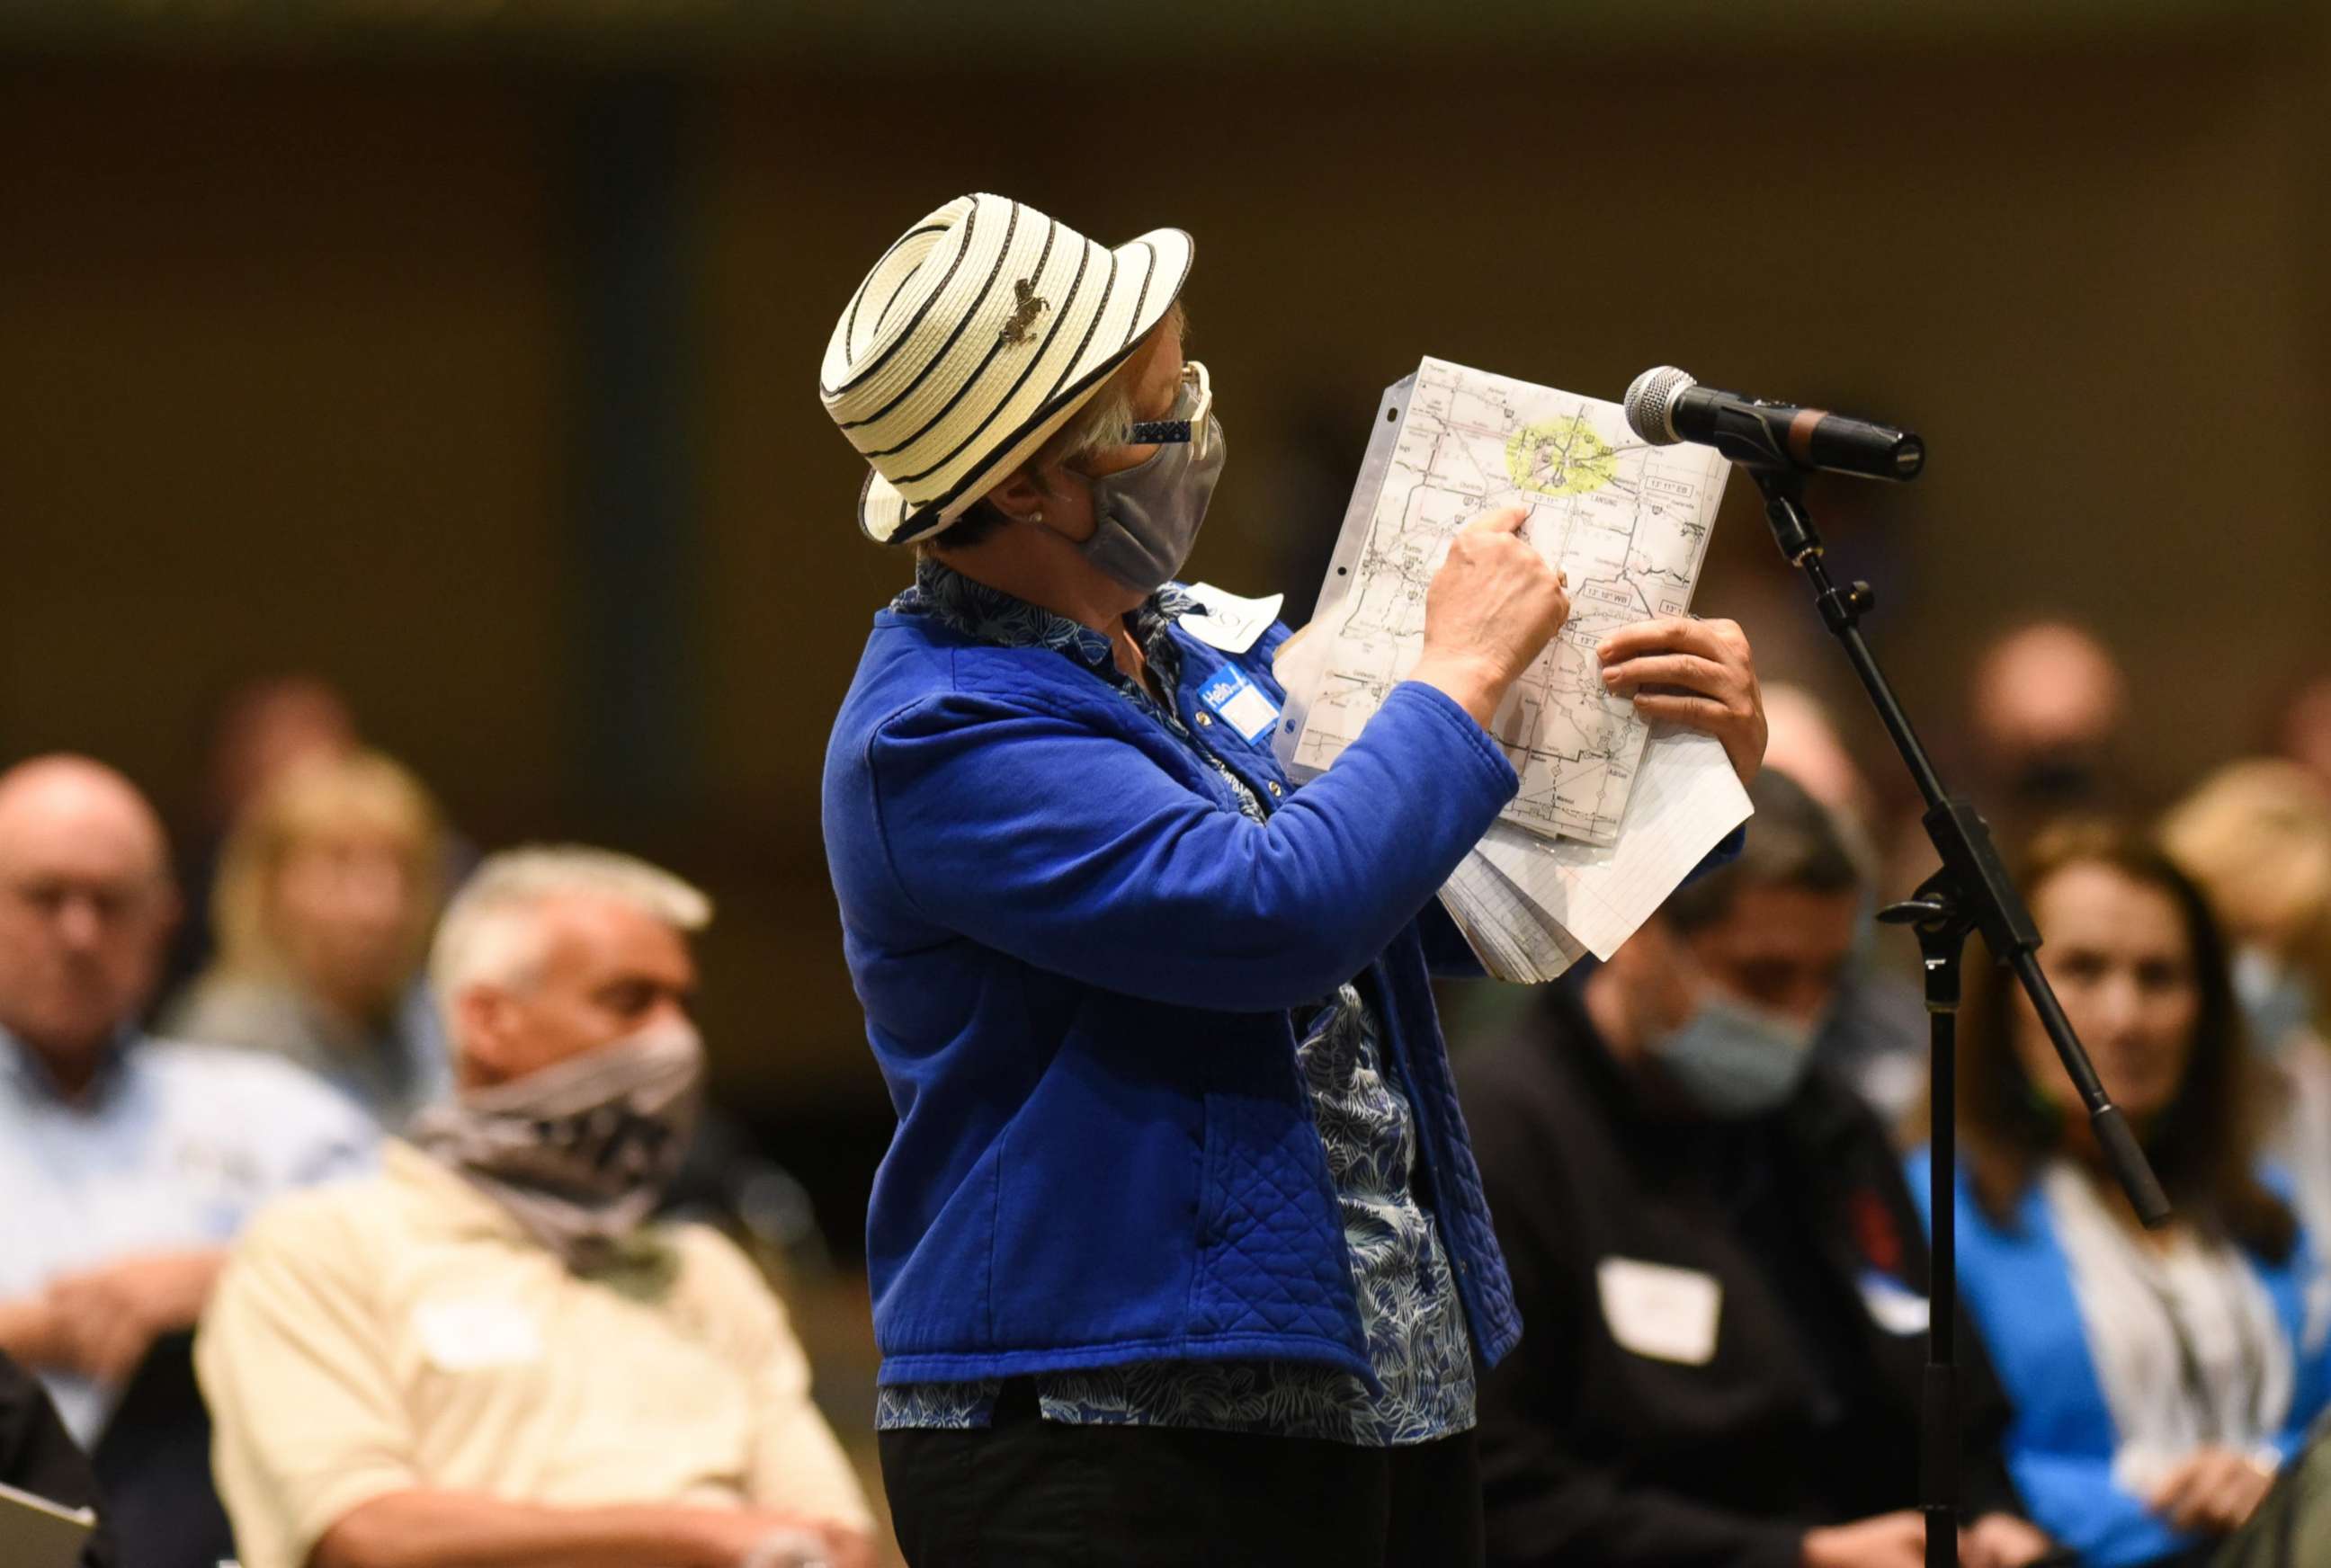 PHOTO: A woman displays a map showing lines of her voting district, May 27, 2021, during the Michigan Independent Citizens Redistricting Commission meeting at the Lansing Center.